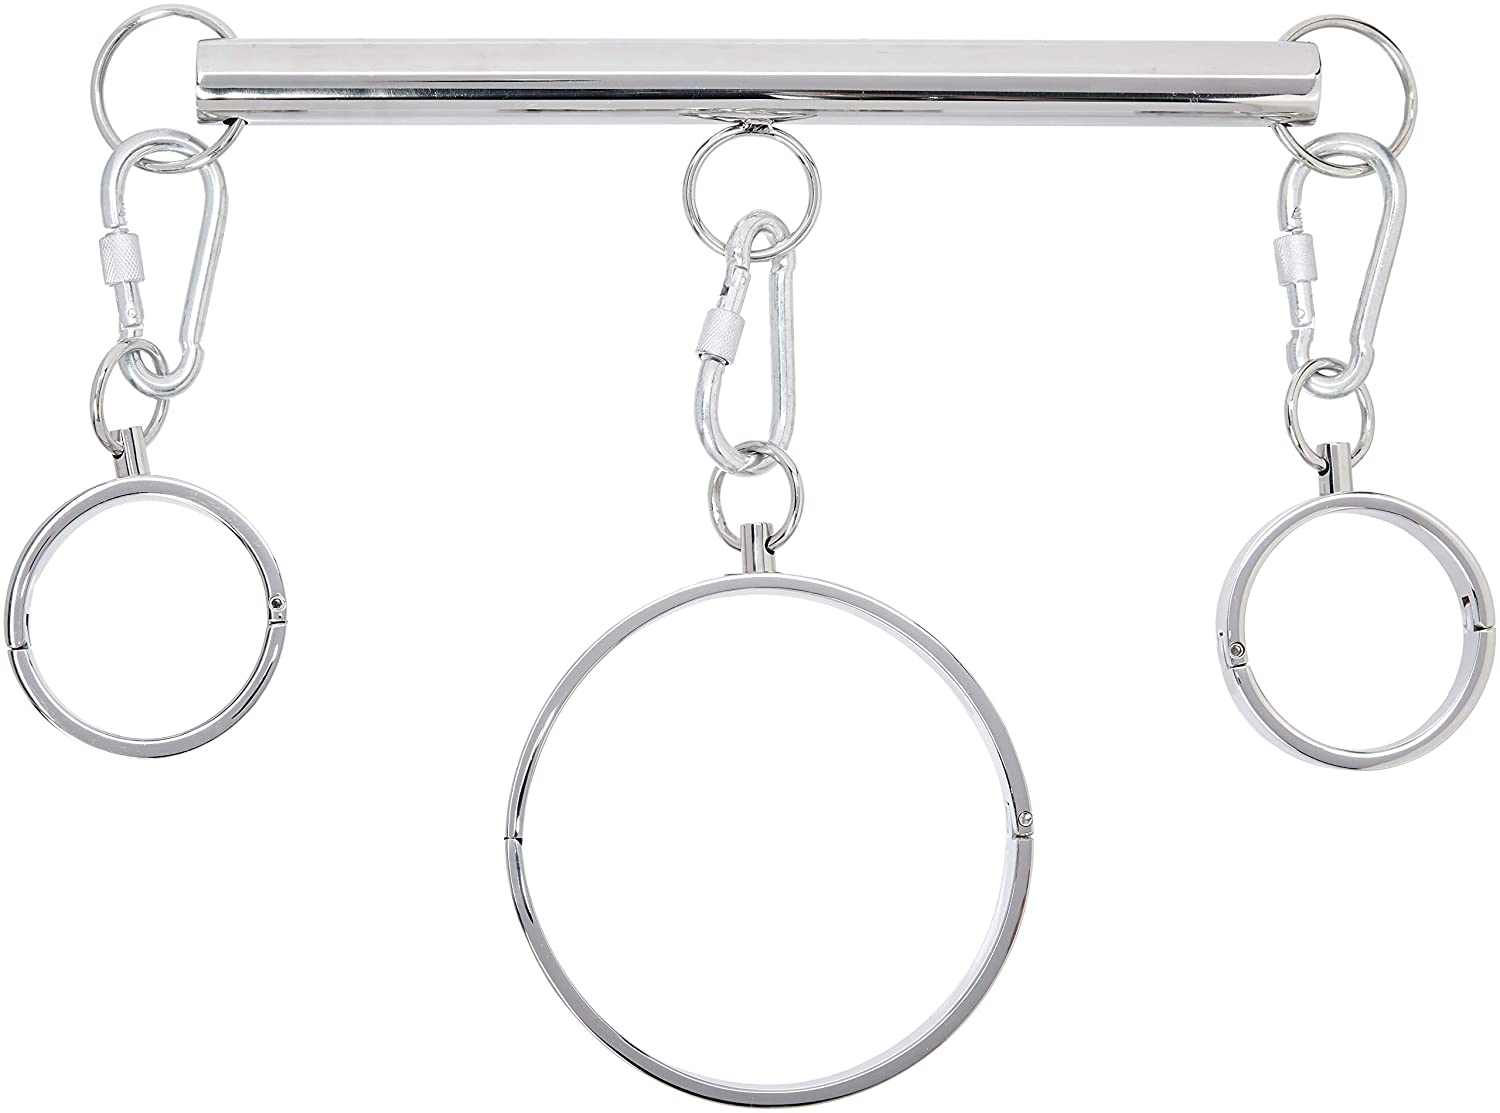 Master Series Stainless Steel Yoke with Collar and Cuffs